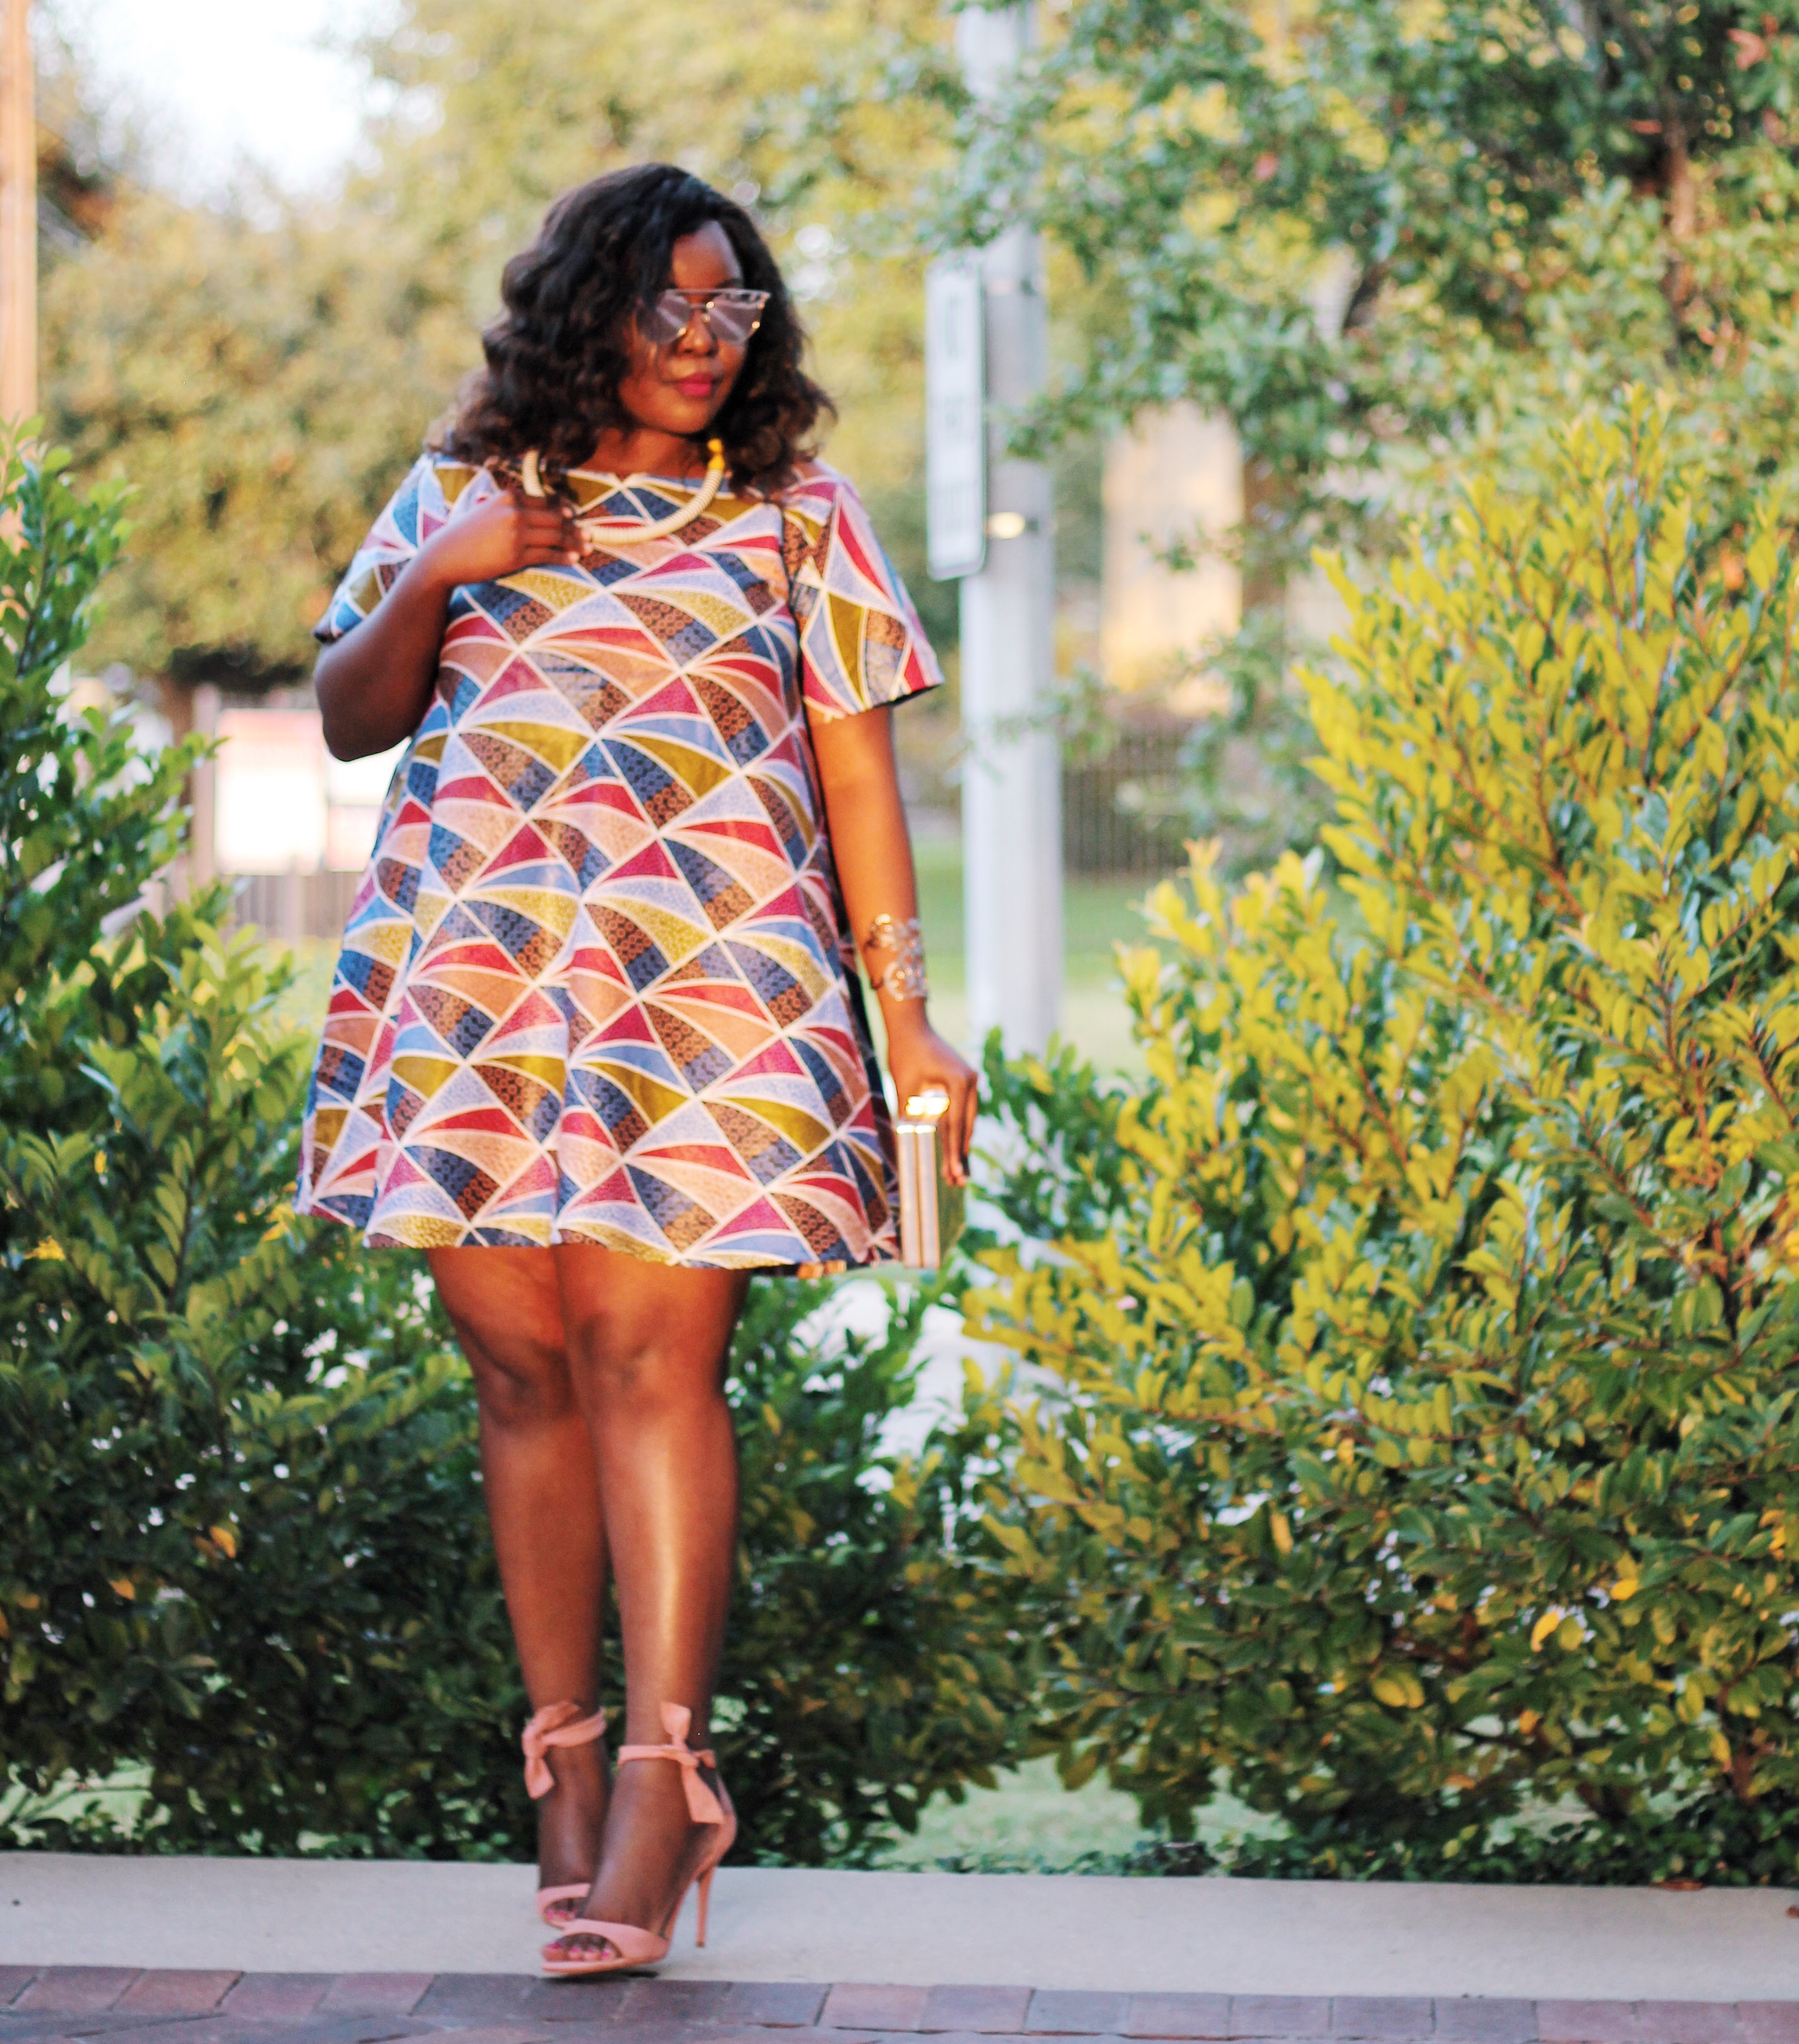 asos curve bloggers, beautiful curvy girls, curvy style dark skin fashion blogger curvy style blogger, dark skin beauty blogger, dark skin blogger, houston blogger, inspiration for 2016, inspiring bloggers and blogs, new years resolutions, plus size blogger, quotes for 2016, relationship advice blogs, rules to live by in the new year, texas blogger, travel blogger, ugandan blogger, ugandan fashionista, ugandan style blogger, african print ankara skirt styles, where to get african print clothes in America and uk, exposure african crafts in kampala uganda, kyaligonza kampala african material, Steve Madden Bowwtye Heel Sandal